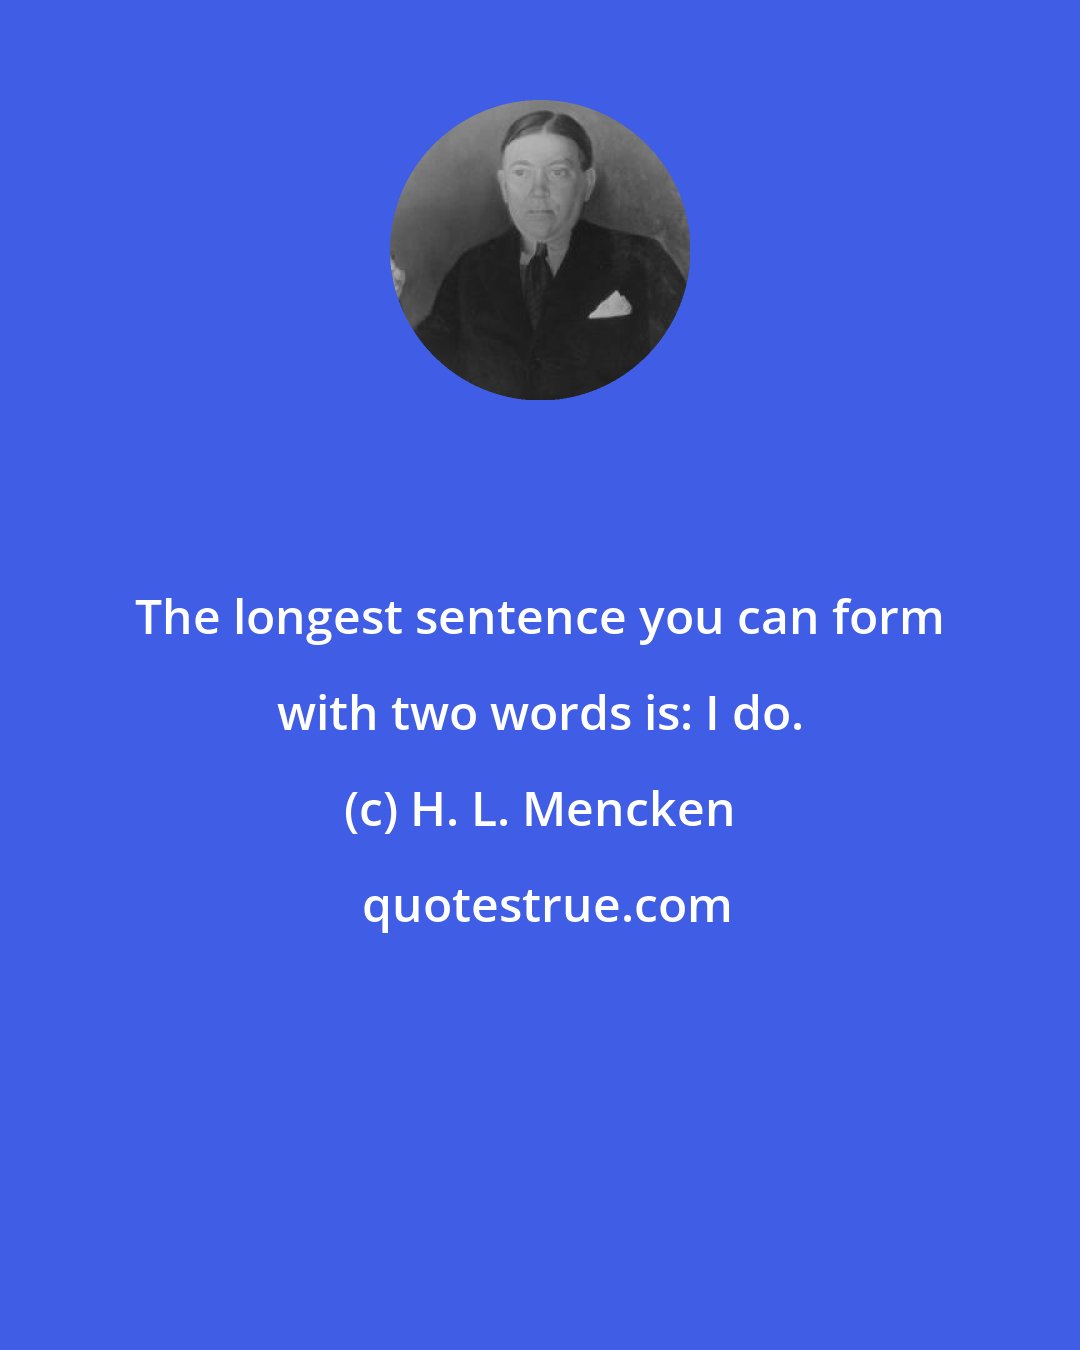 H. L. Mencken: The longest sentence you can form with two words is: I do.